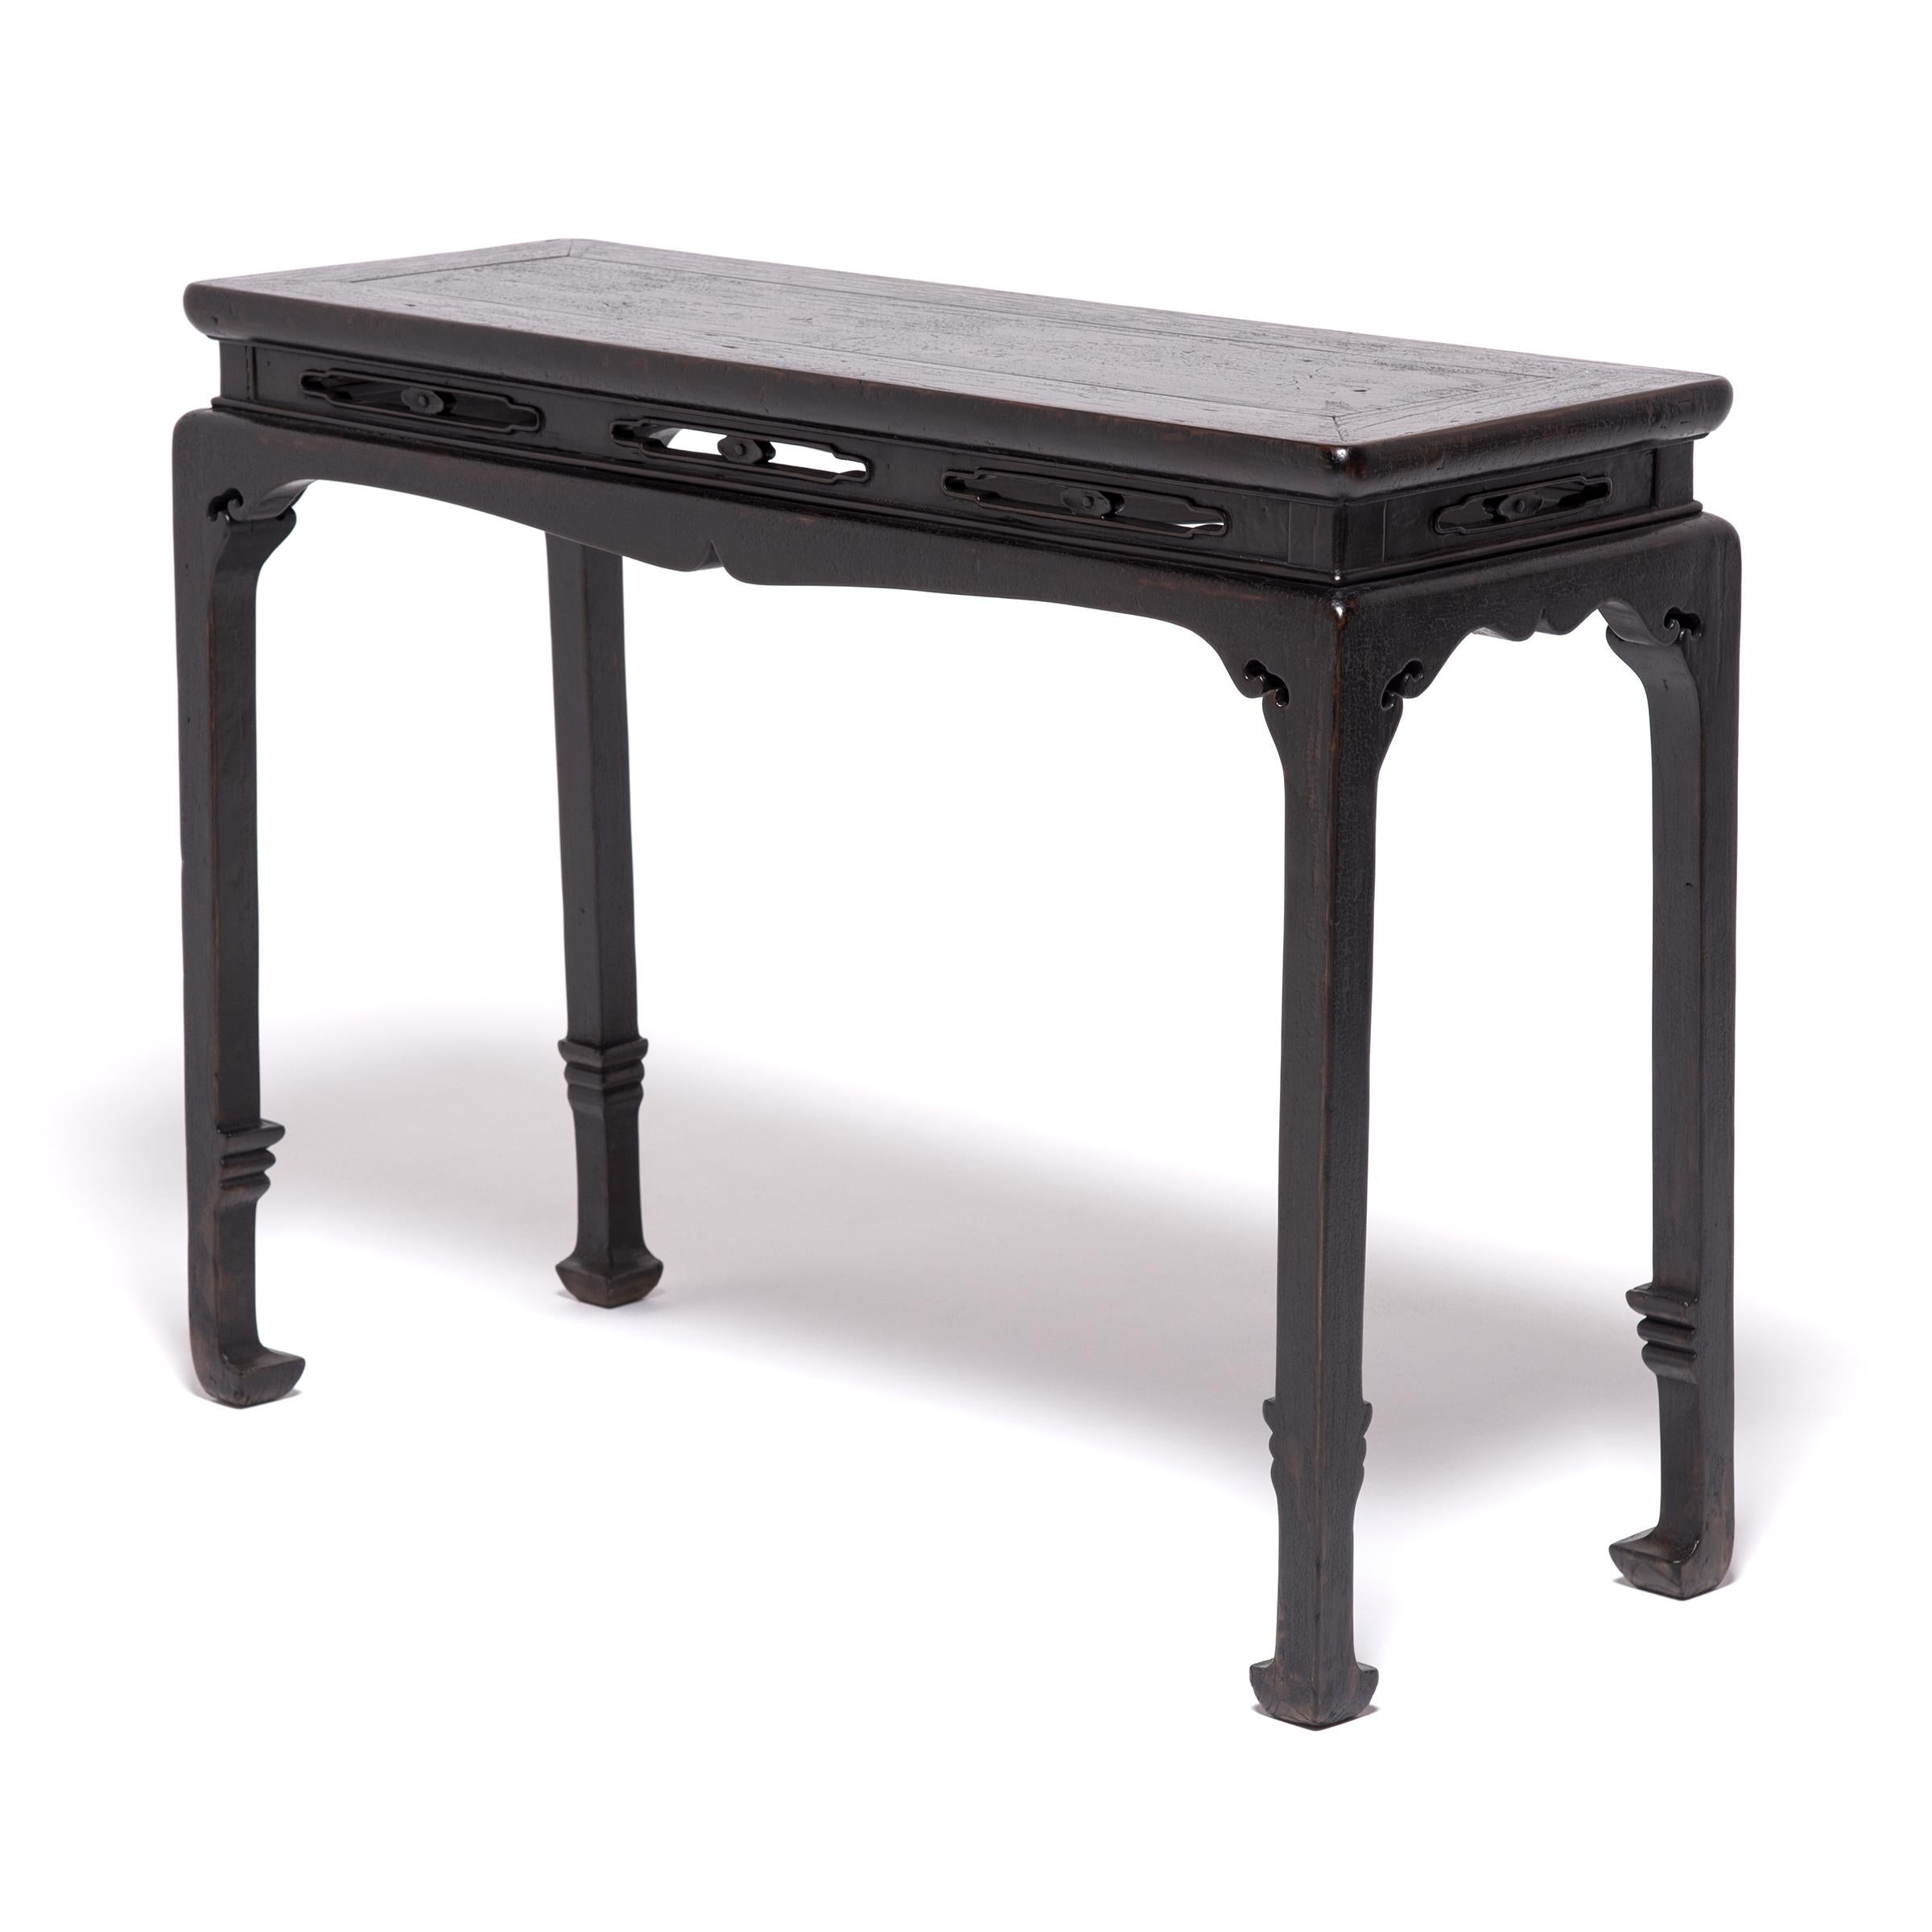 Handcrafted of northern elmwood over a century ago, this simple console table expresses the clean lines and elegant restraint that make Qing-dynasty carpentry so sought after. Emphasizing the table's refined form, a simple cusped apron flows into